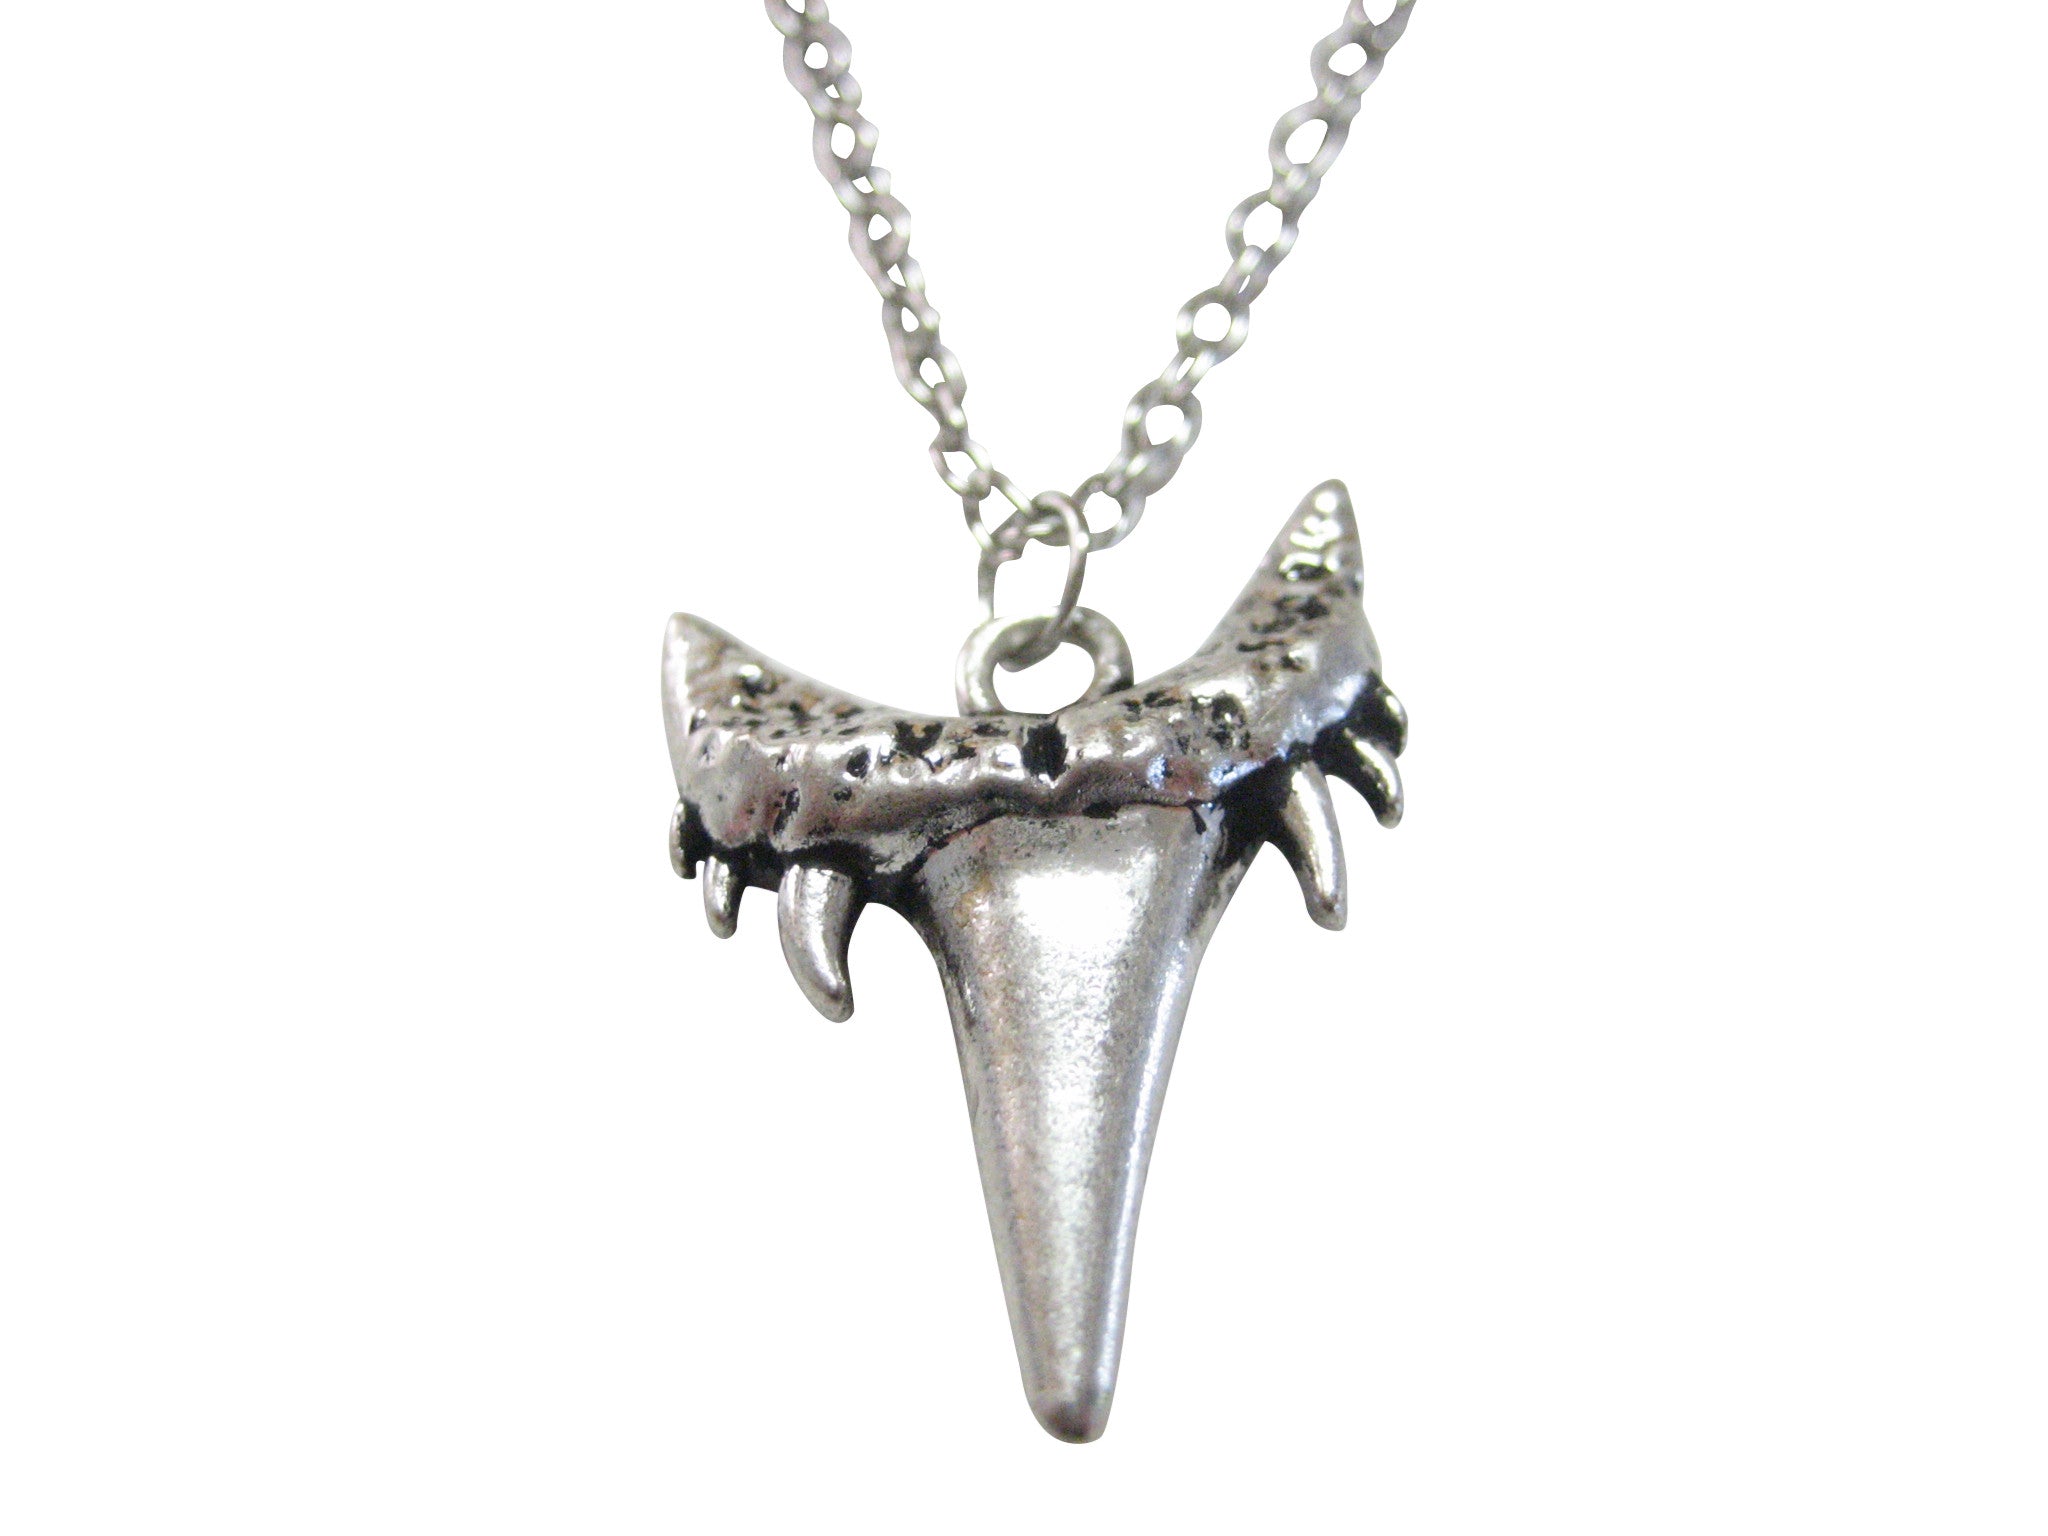 Textured Shark Tooth Pendant Necklace